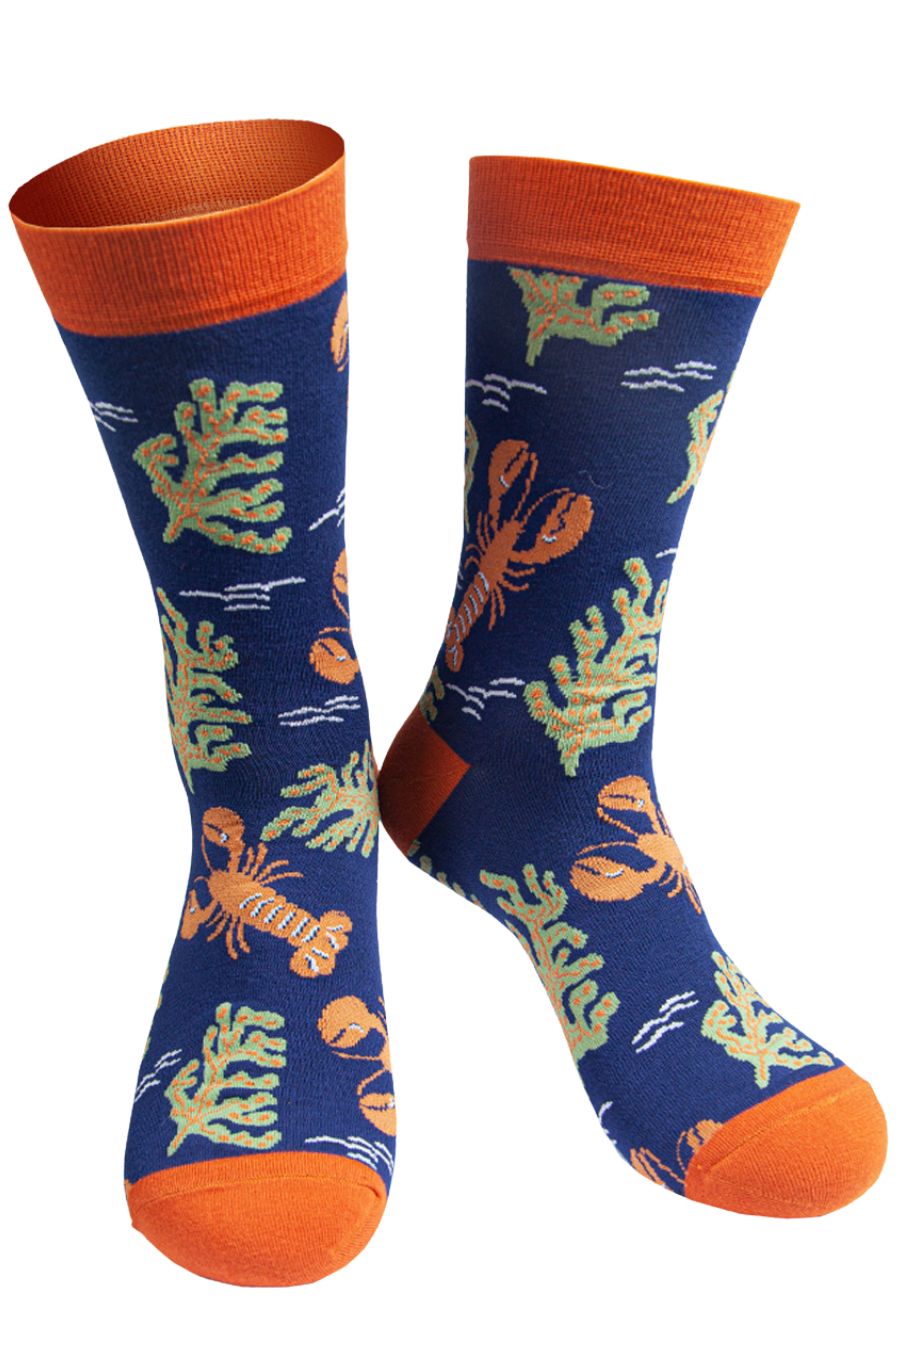 navy blue socks with a pattern of lobsters and ocean plant life